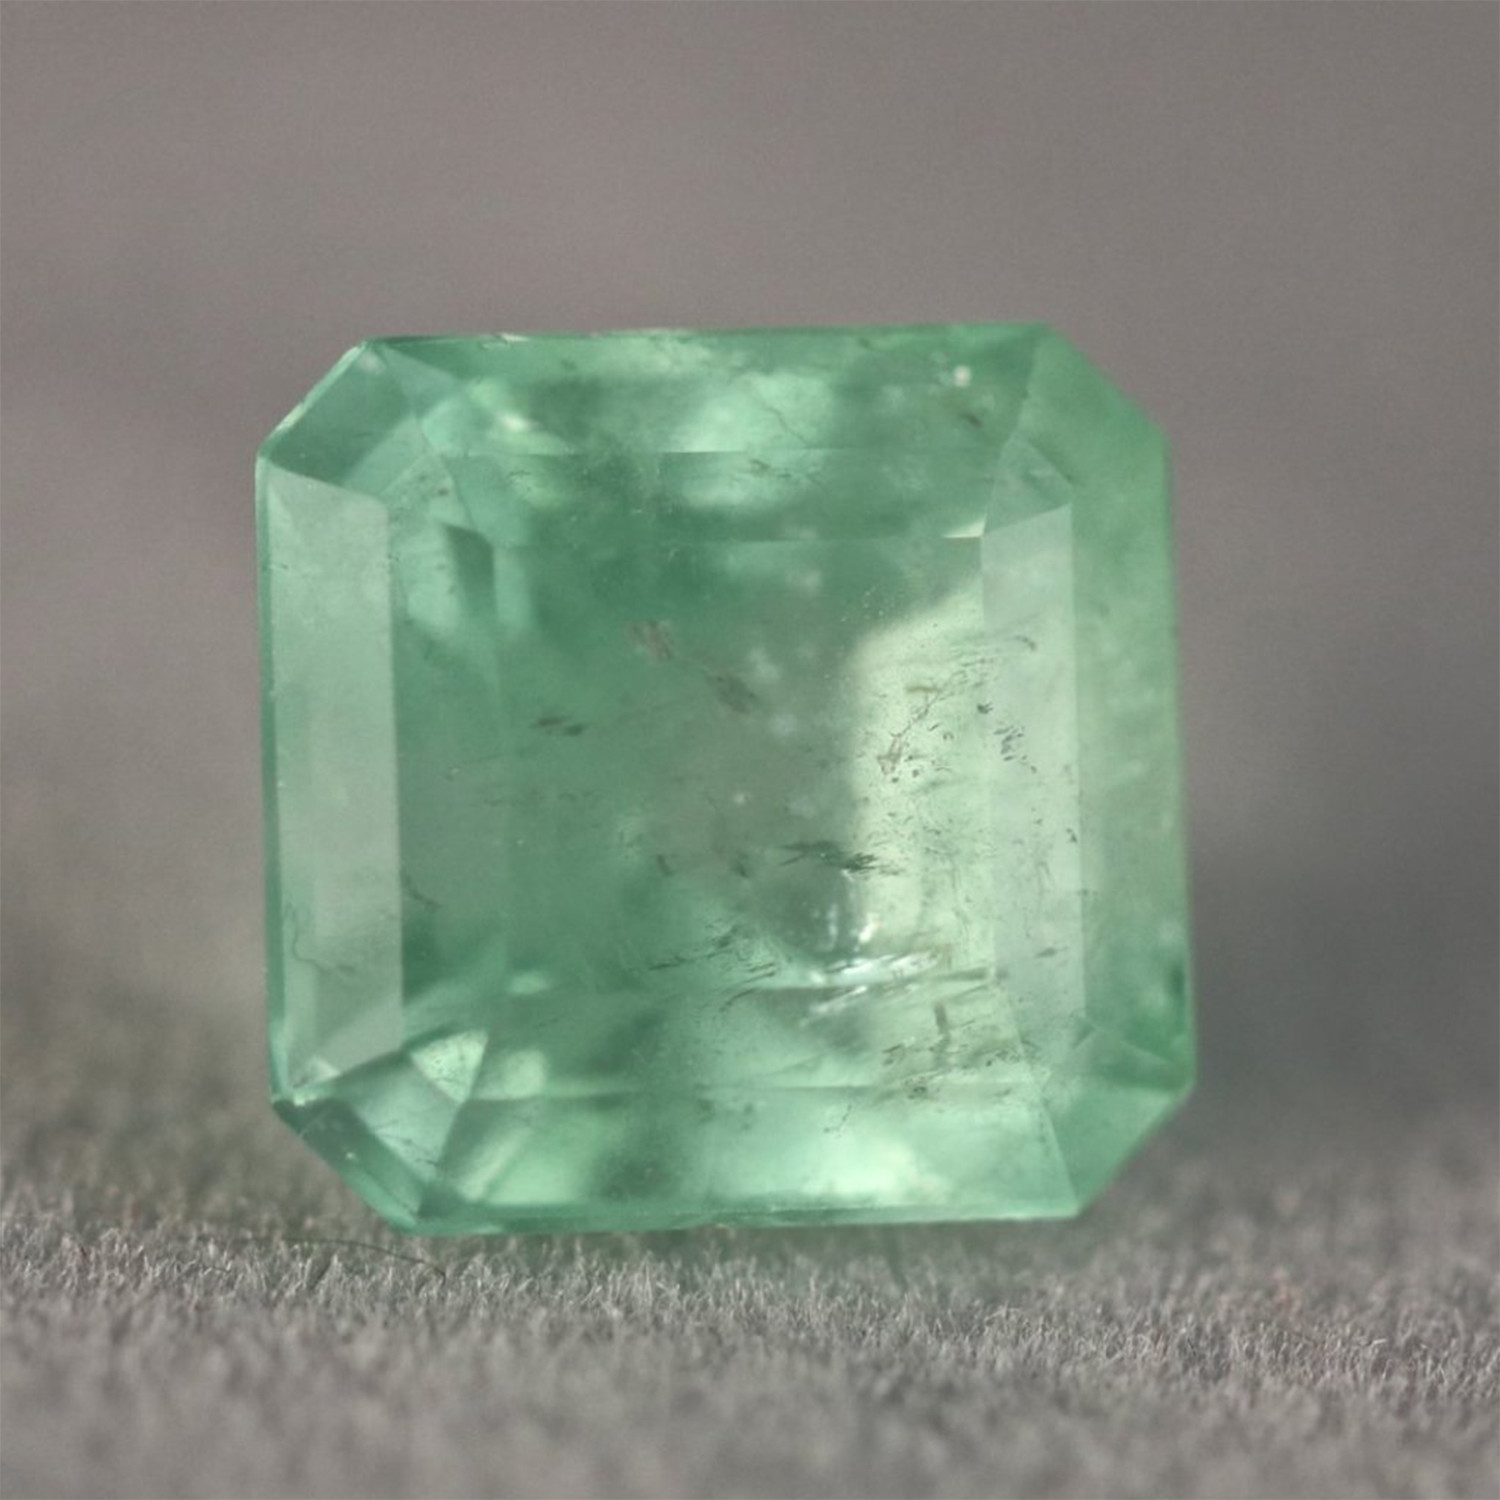 Beautiful Mint Green Colombian Emerald // 7.2 carats - Fossil Realm ...